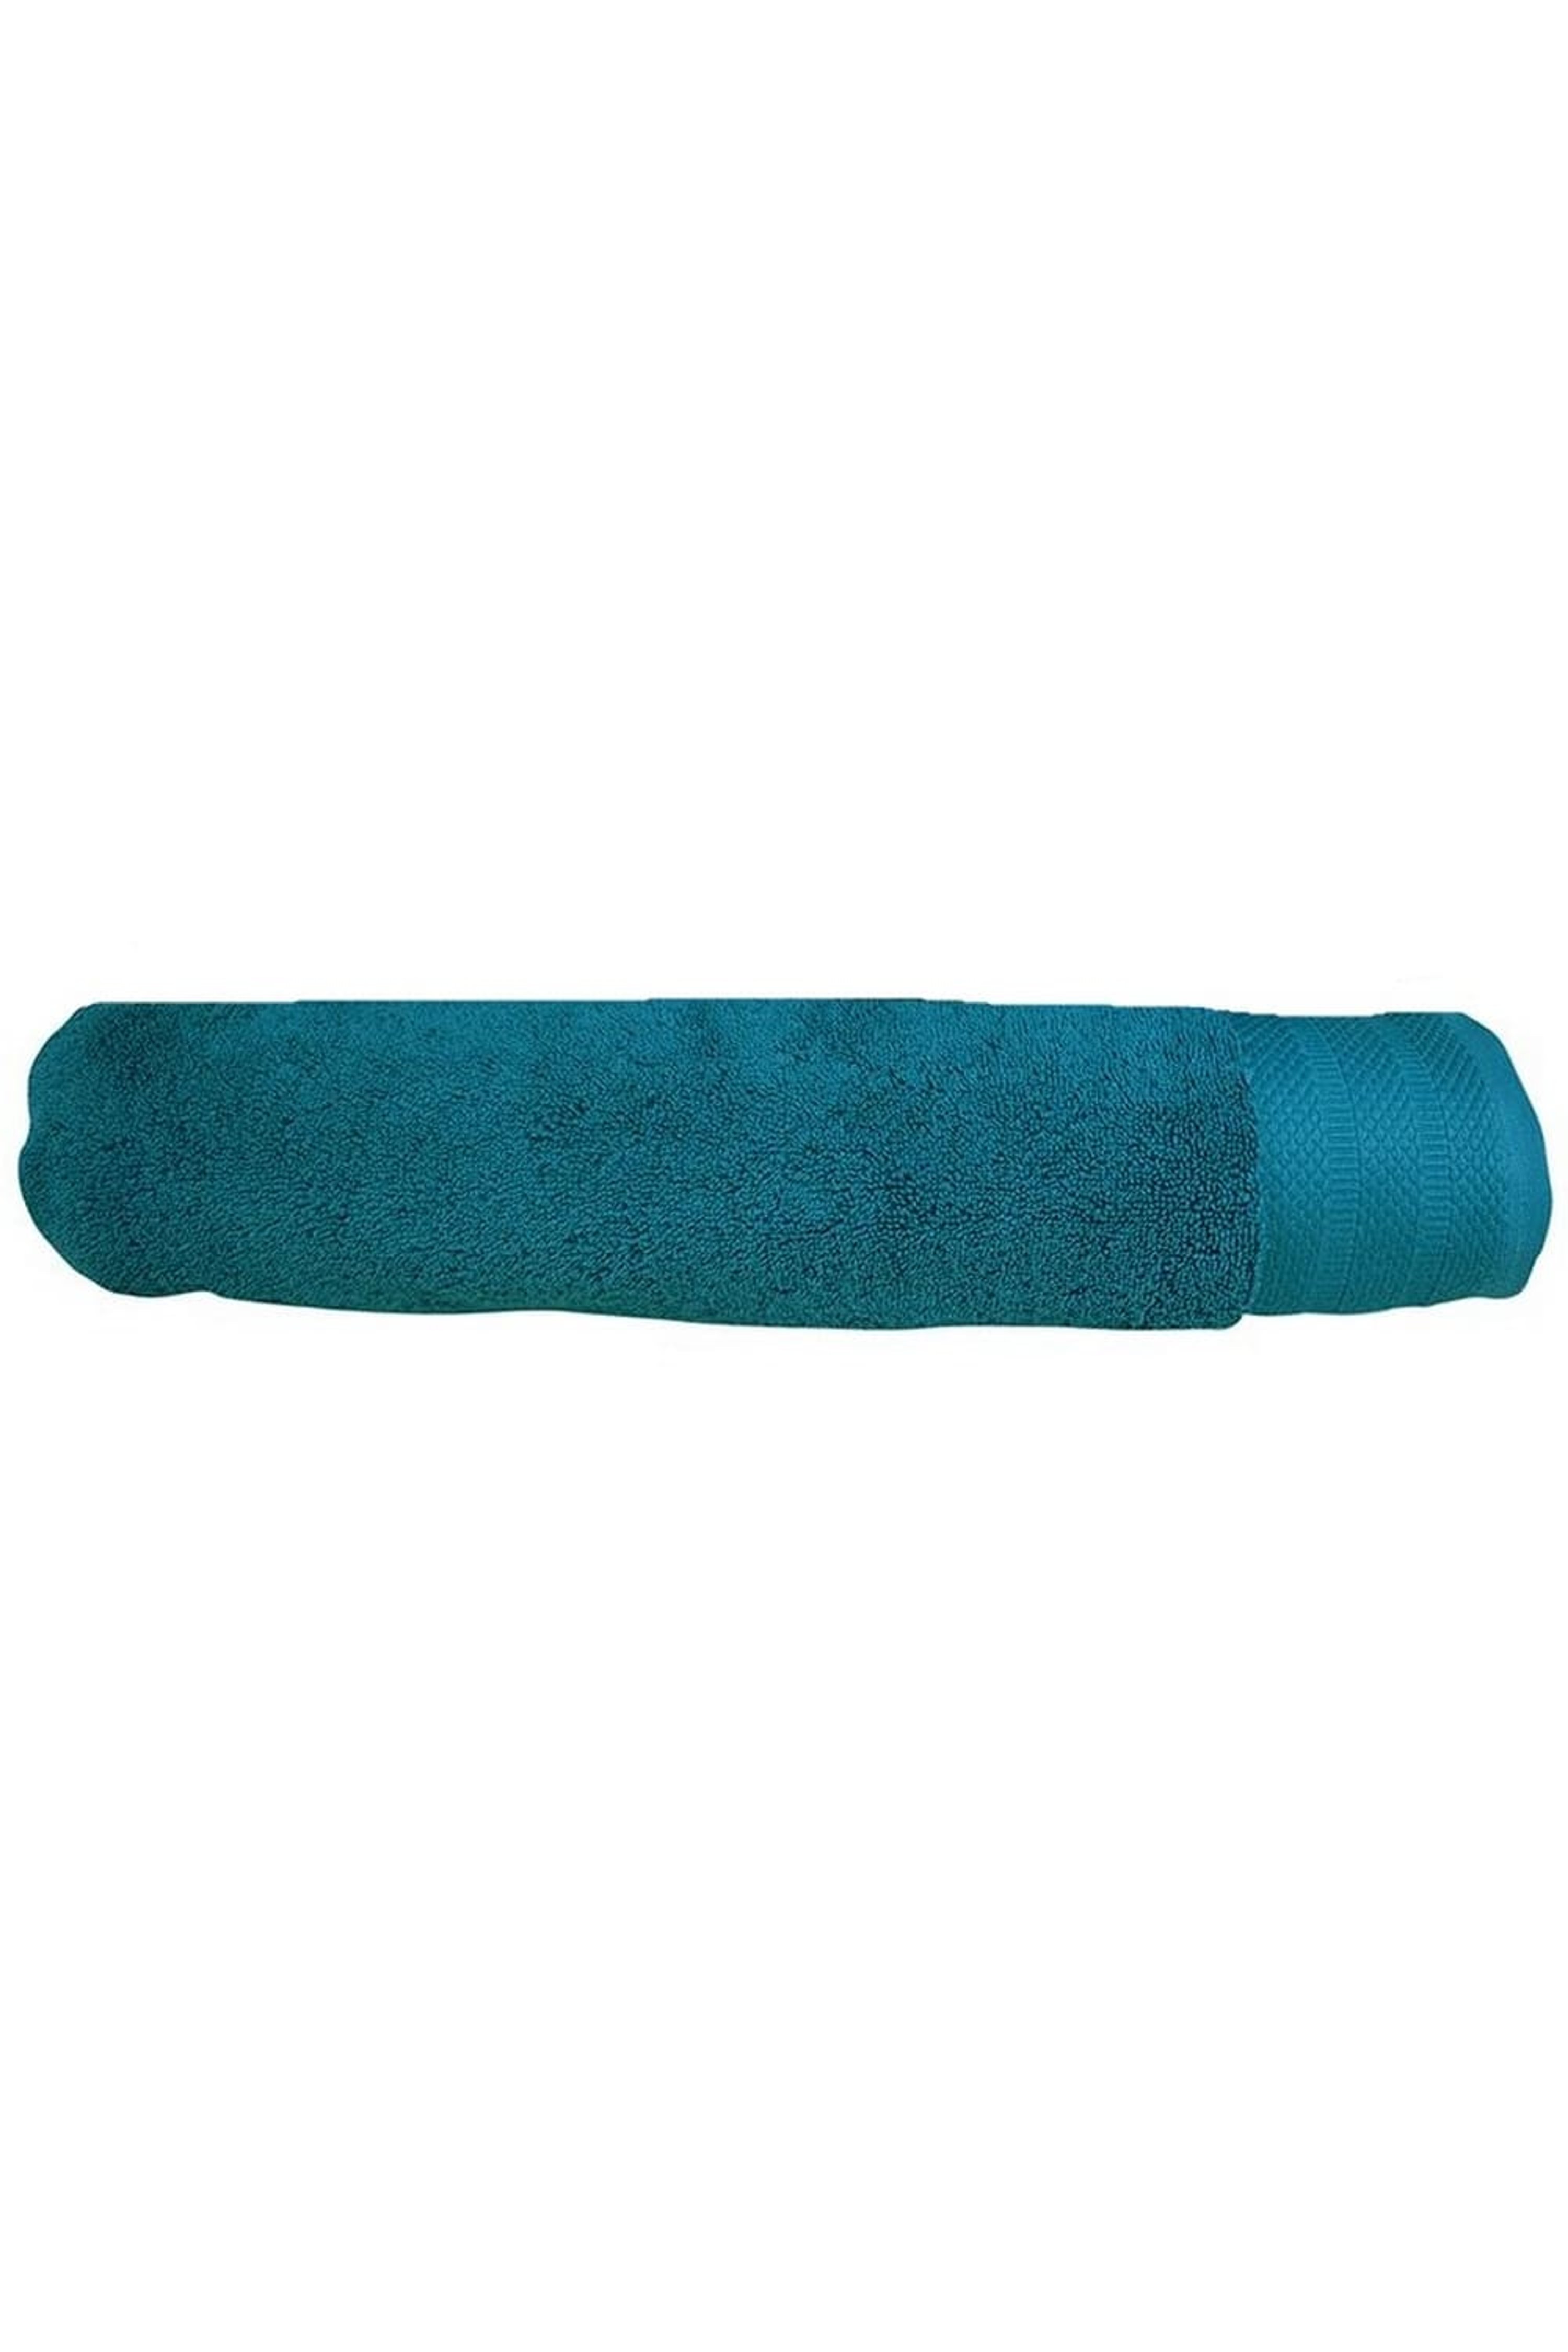 A&R TOWELS A&R TOWELS A&R TOWELS PURE LUXE BATH TOWEL (PURE BLUE) (ONE SIZE)